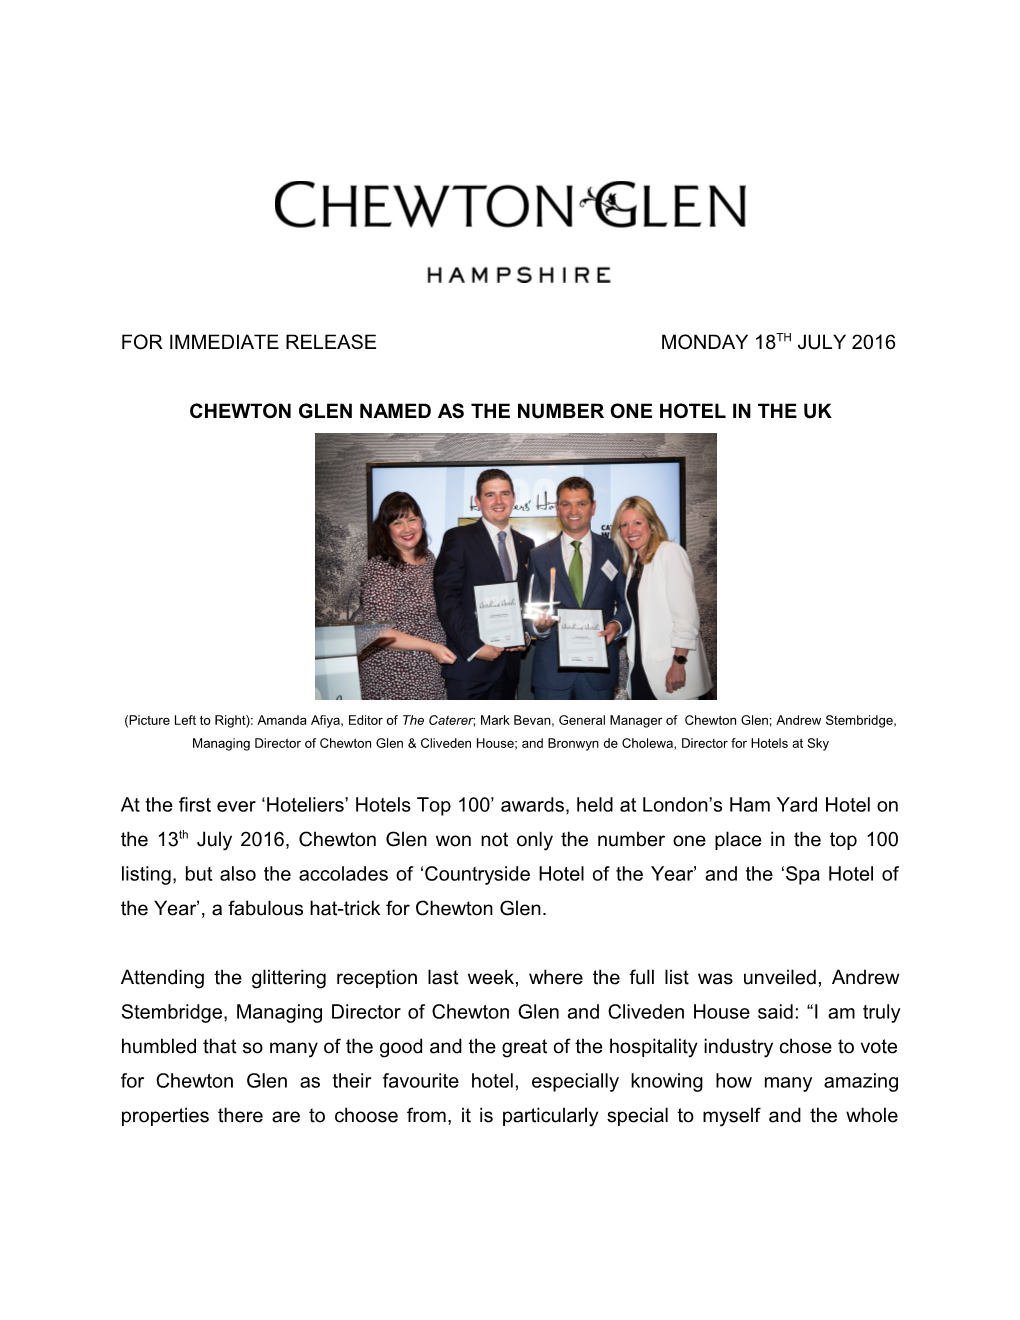 Chewton Glen Named As the Number One Hotel in the Uk